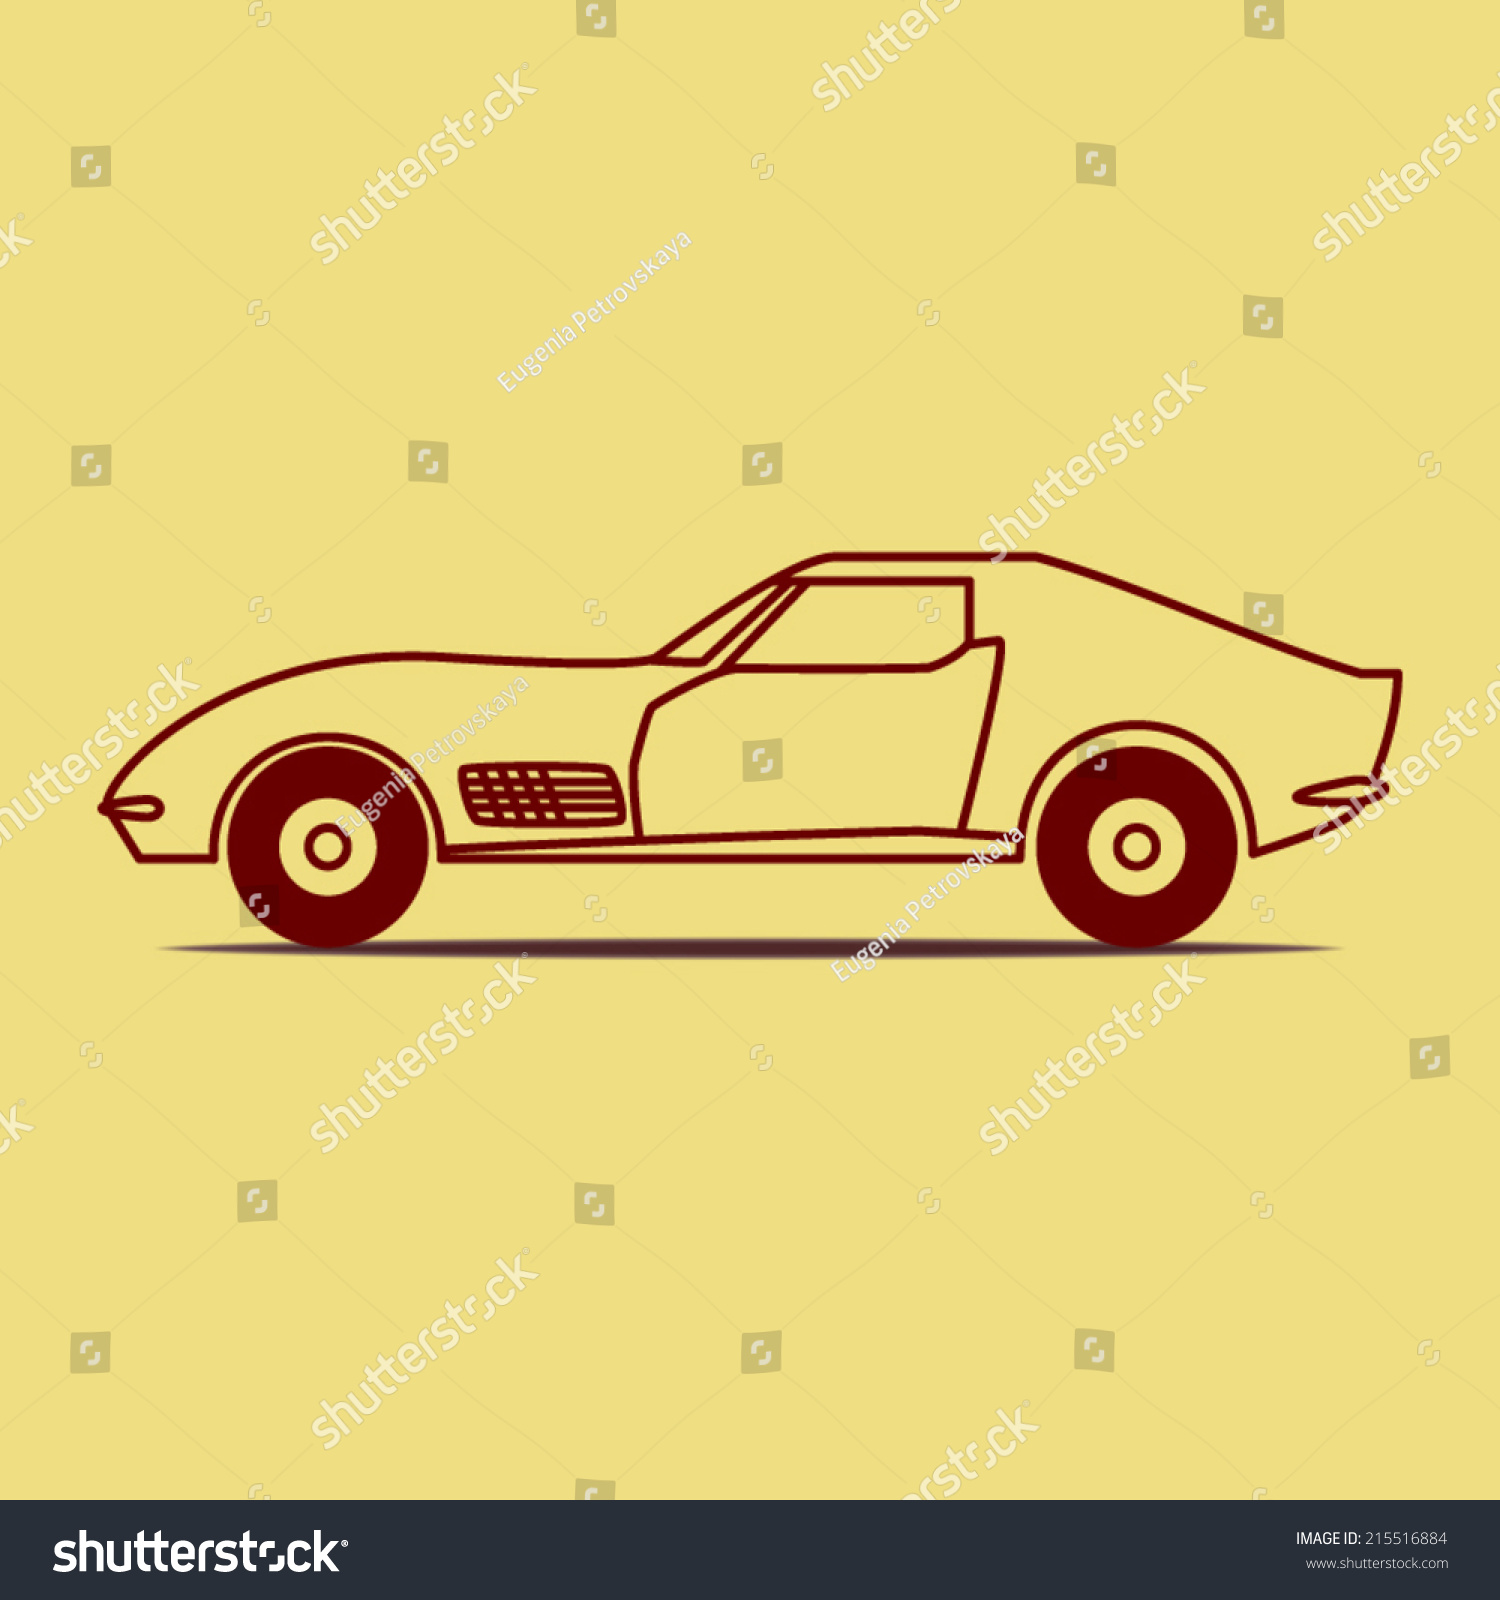 SVG of Simple retro car illustration made in vector in flat style svg